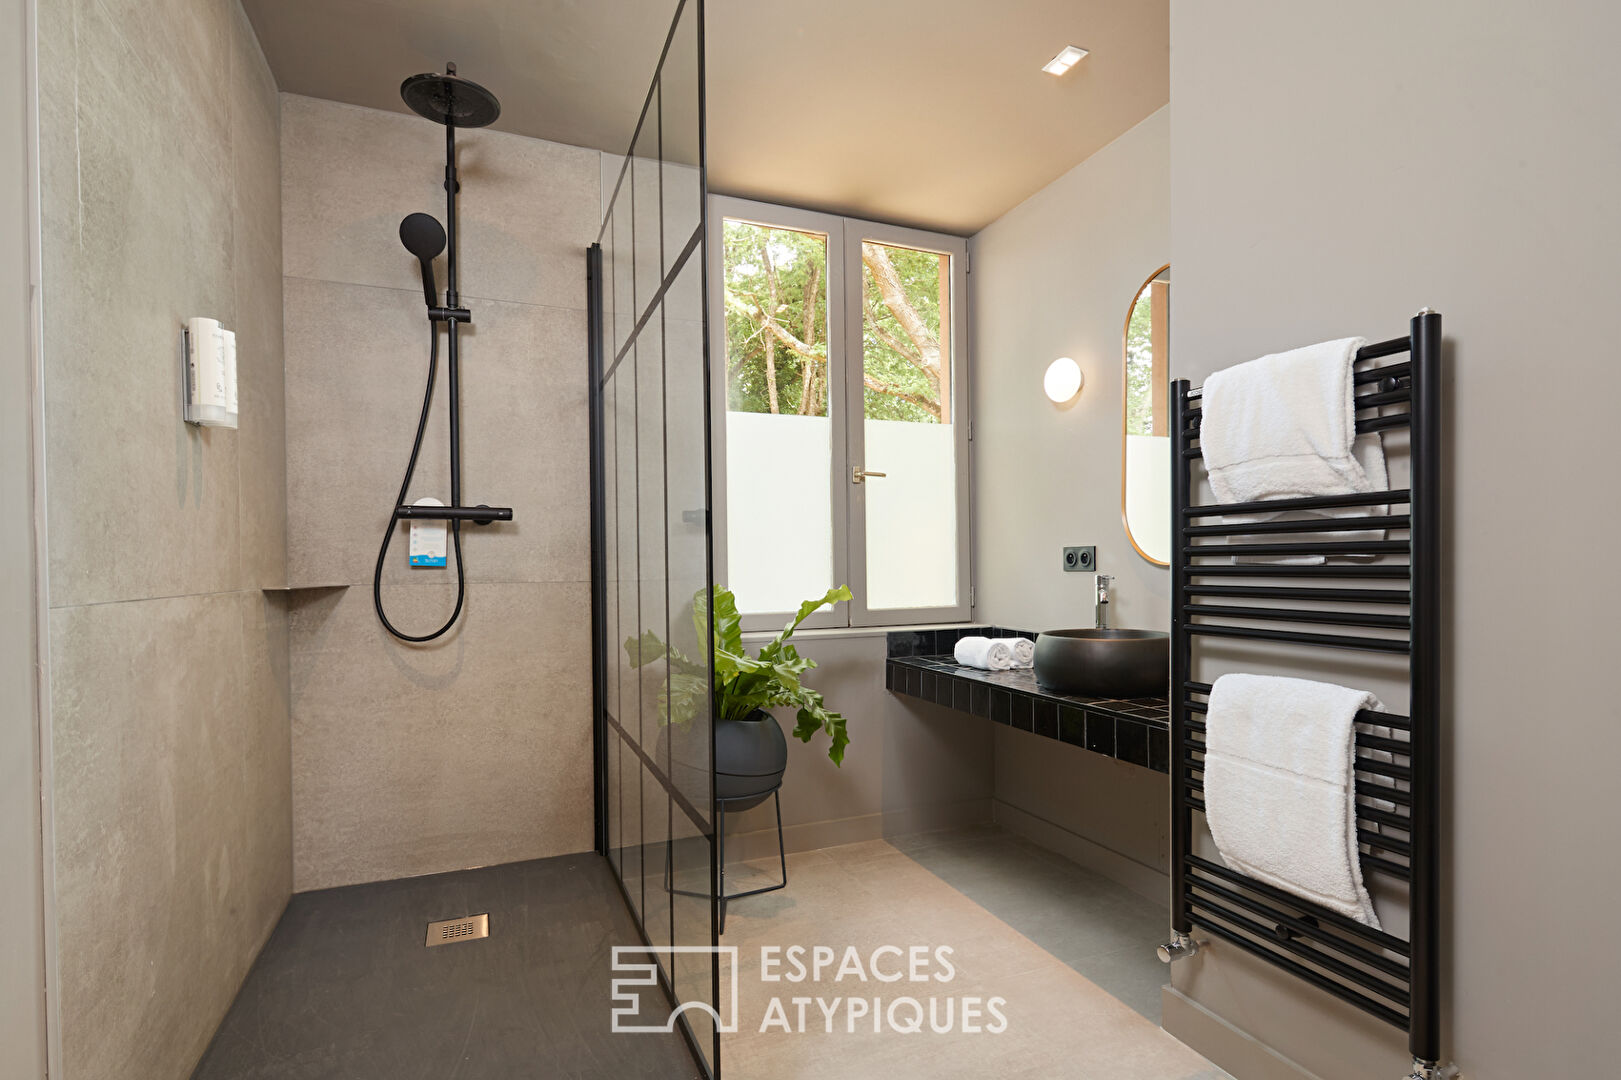 Eco-Luxurious Oasis in the Heart of La Brière